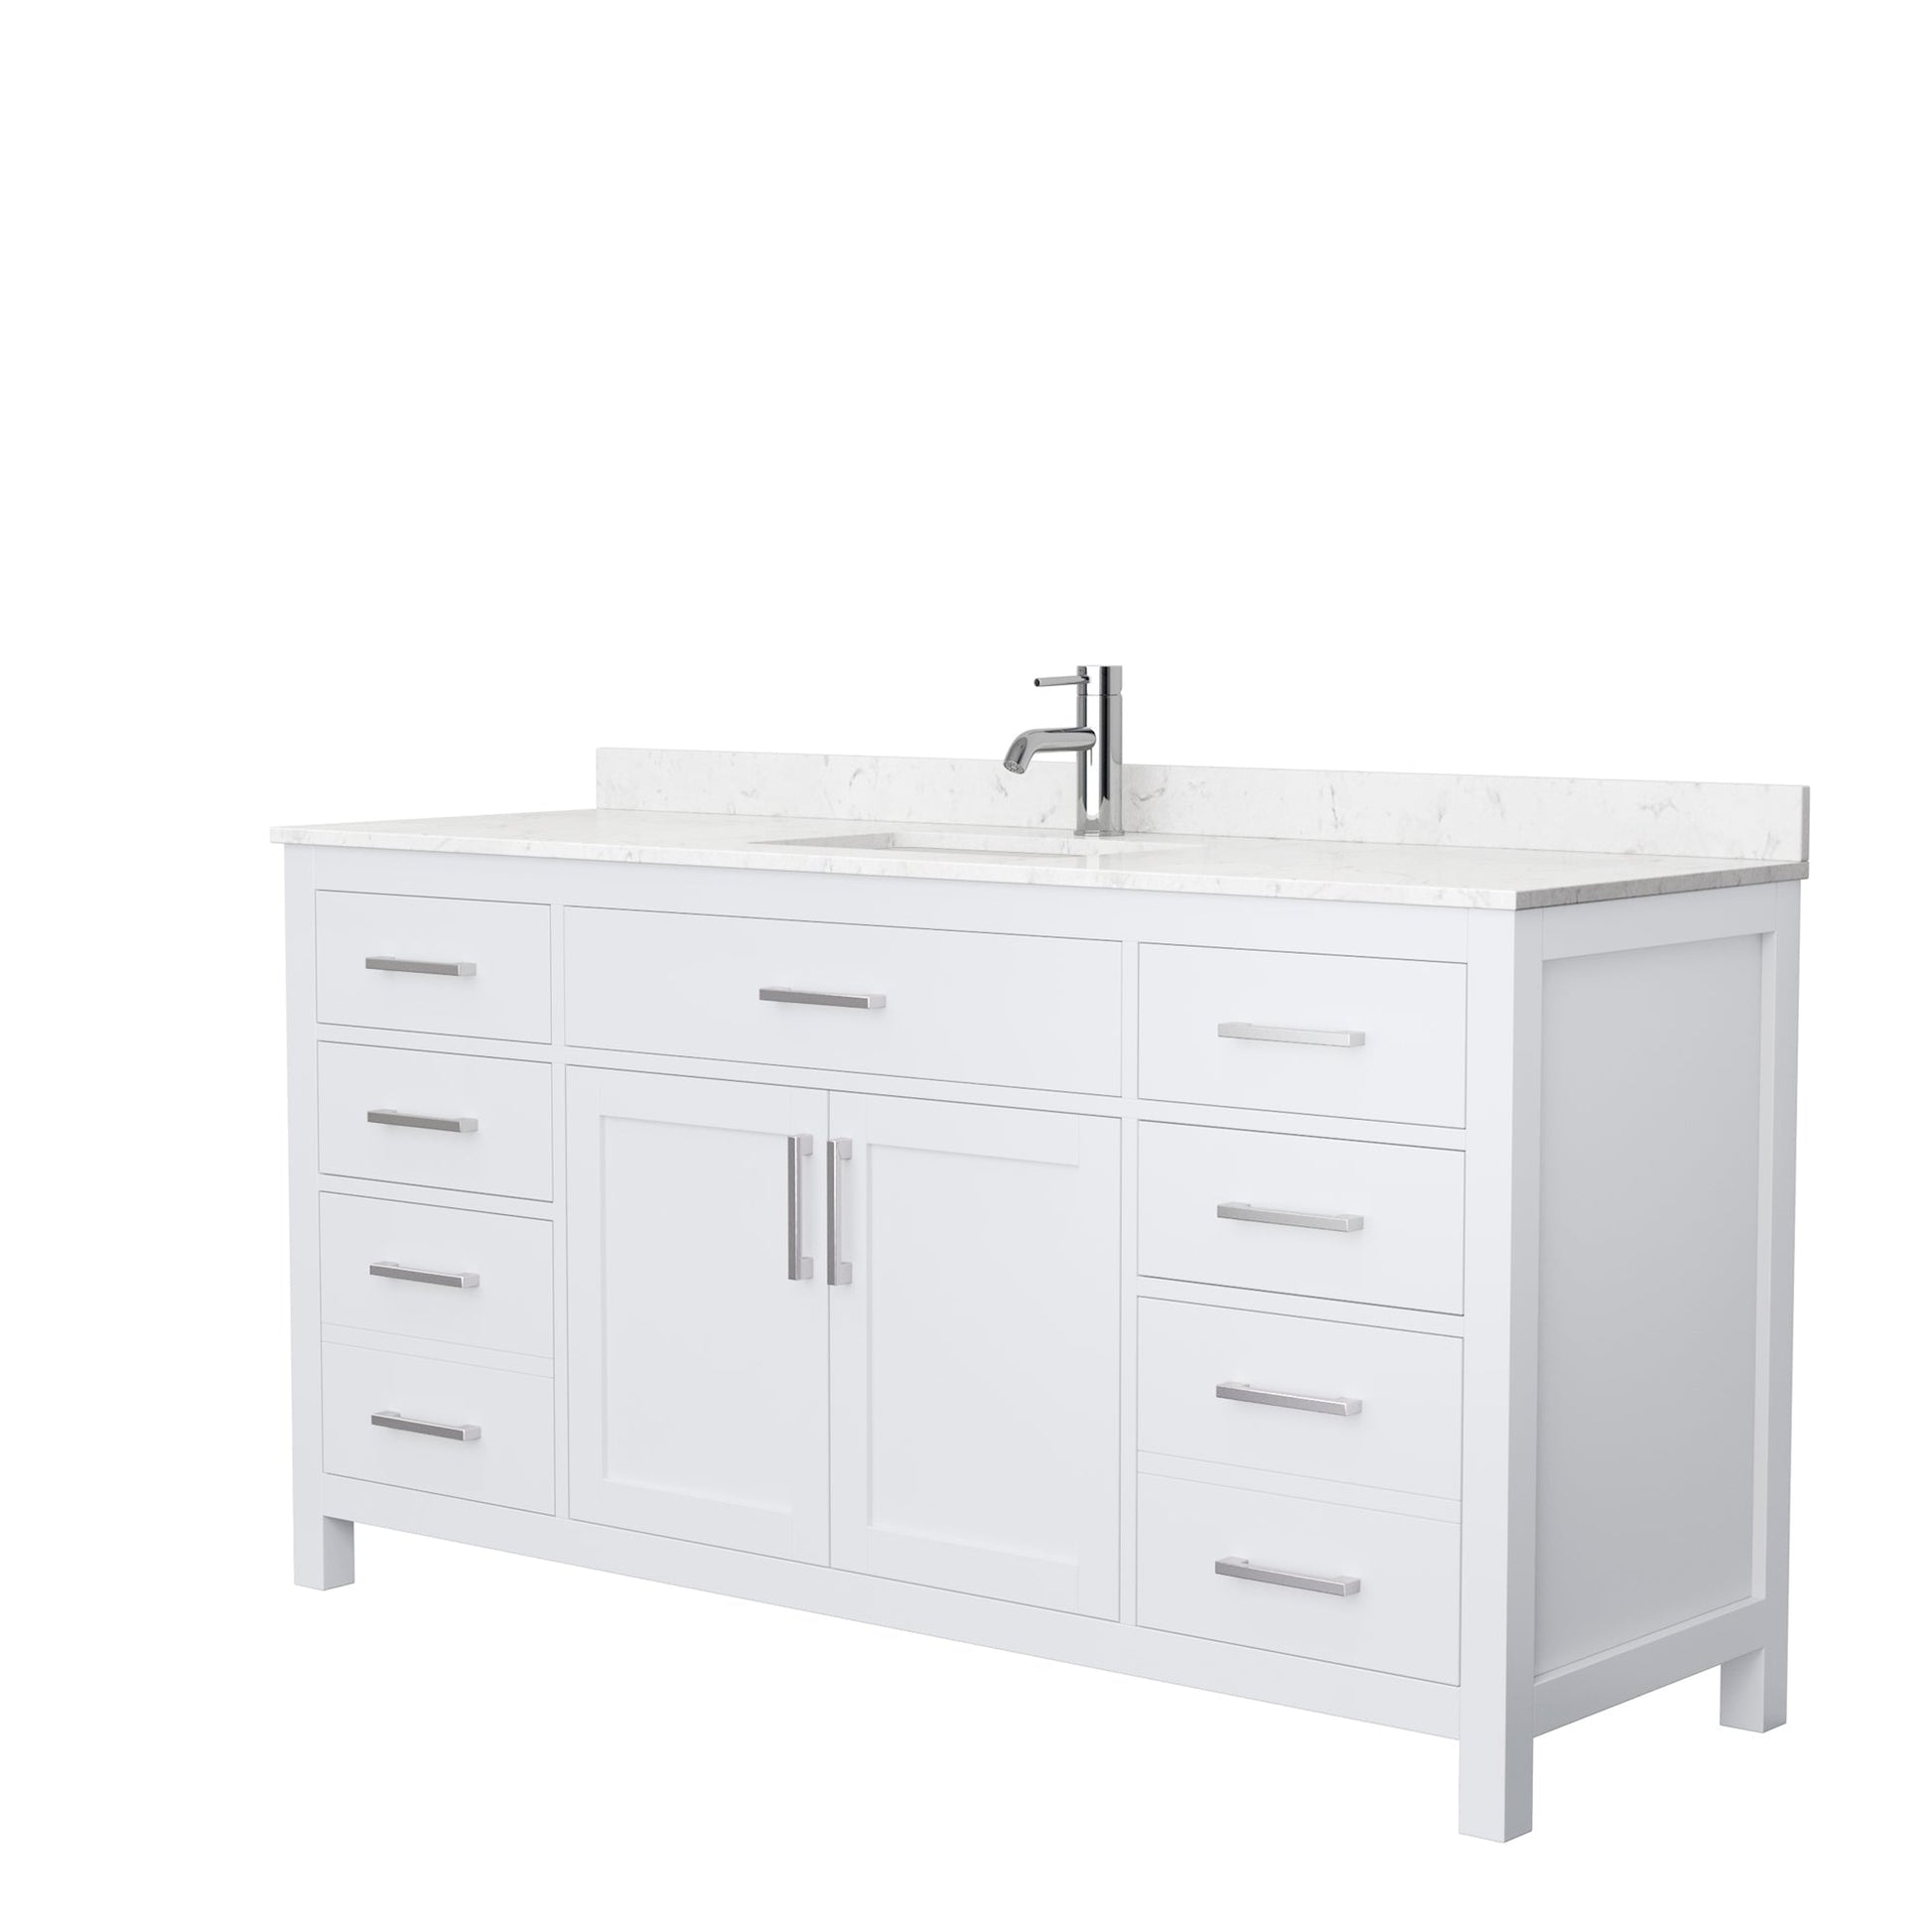 Wyndham Collection Beckett 66" Single Bathroom White Vanity With White Carrara Cultured Marble Countertop, Undermount Square Sink And Brushed Nickel Trim